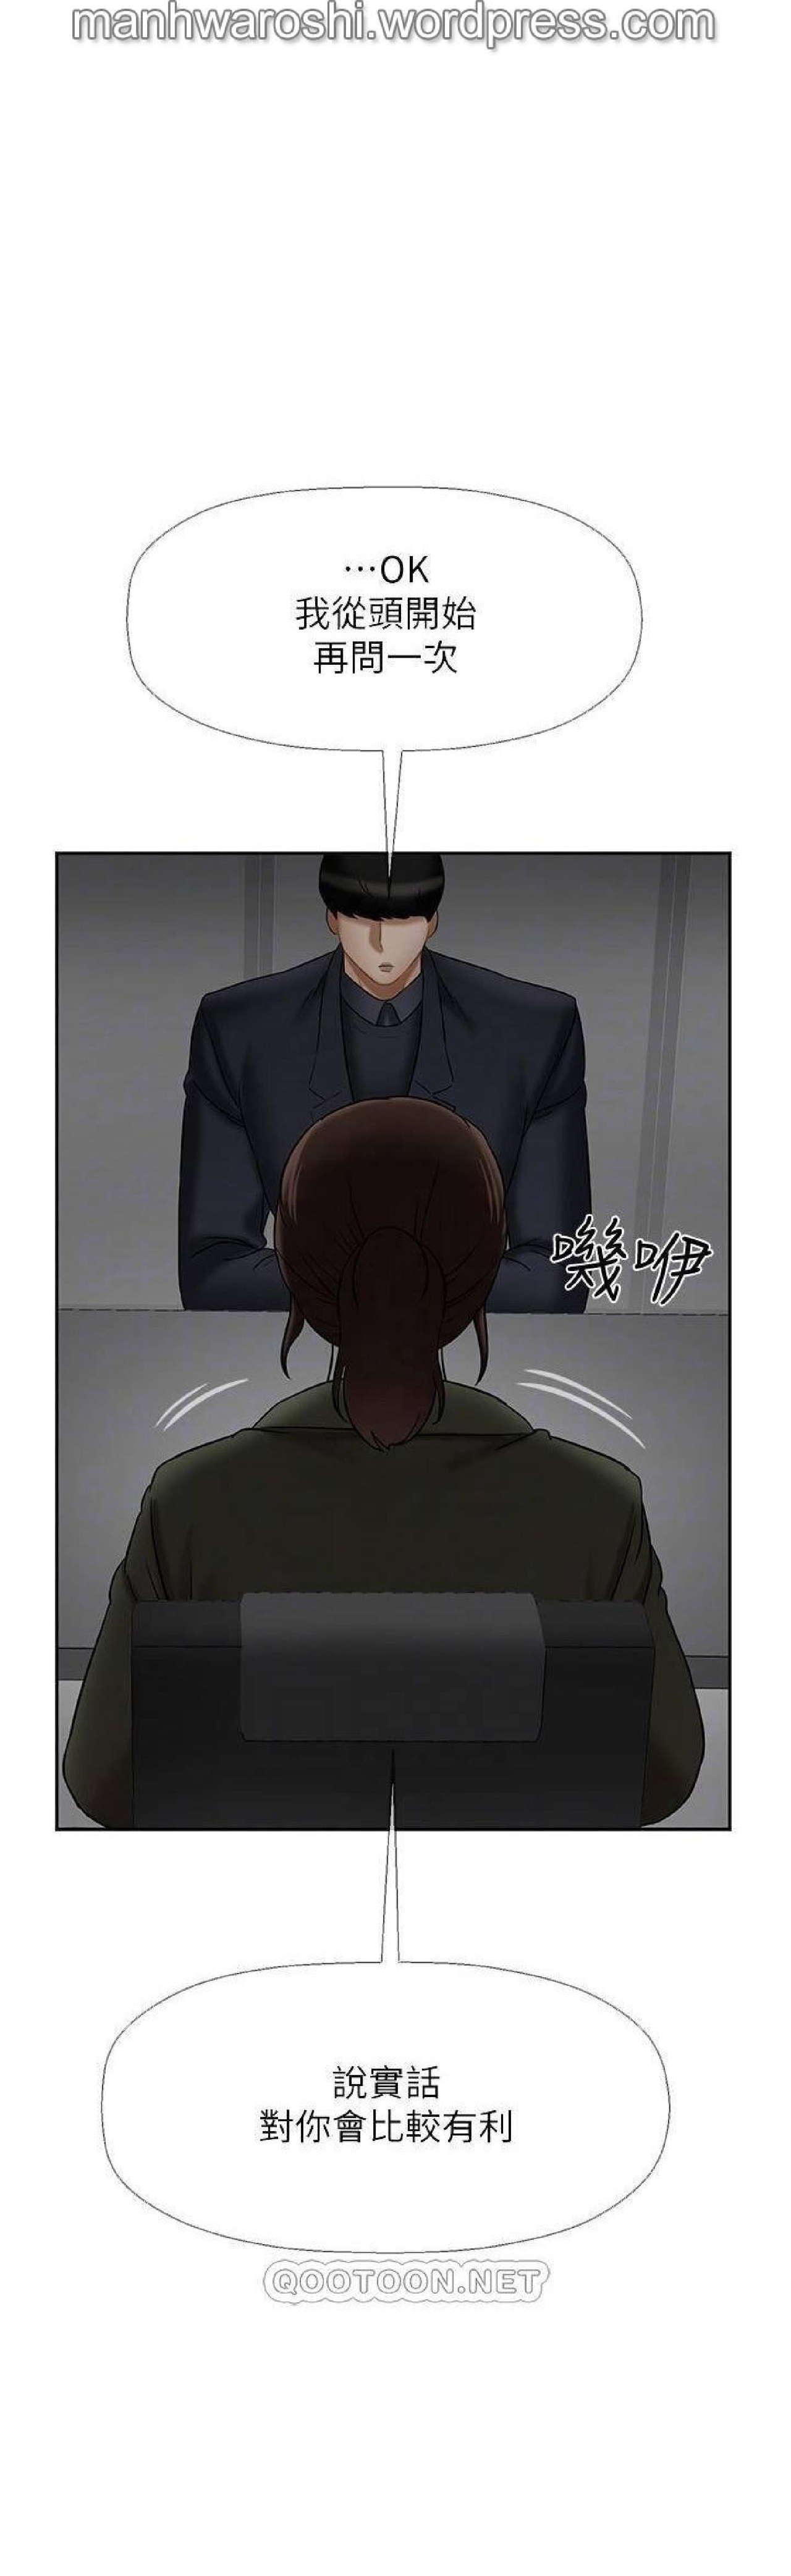 Free Amateur Porn 坏老师 | PHYSICAL CLASSROOM 21 [Chinese] Manhwa Couple Sex - Page 5